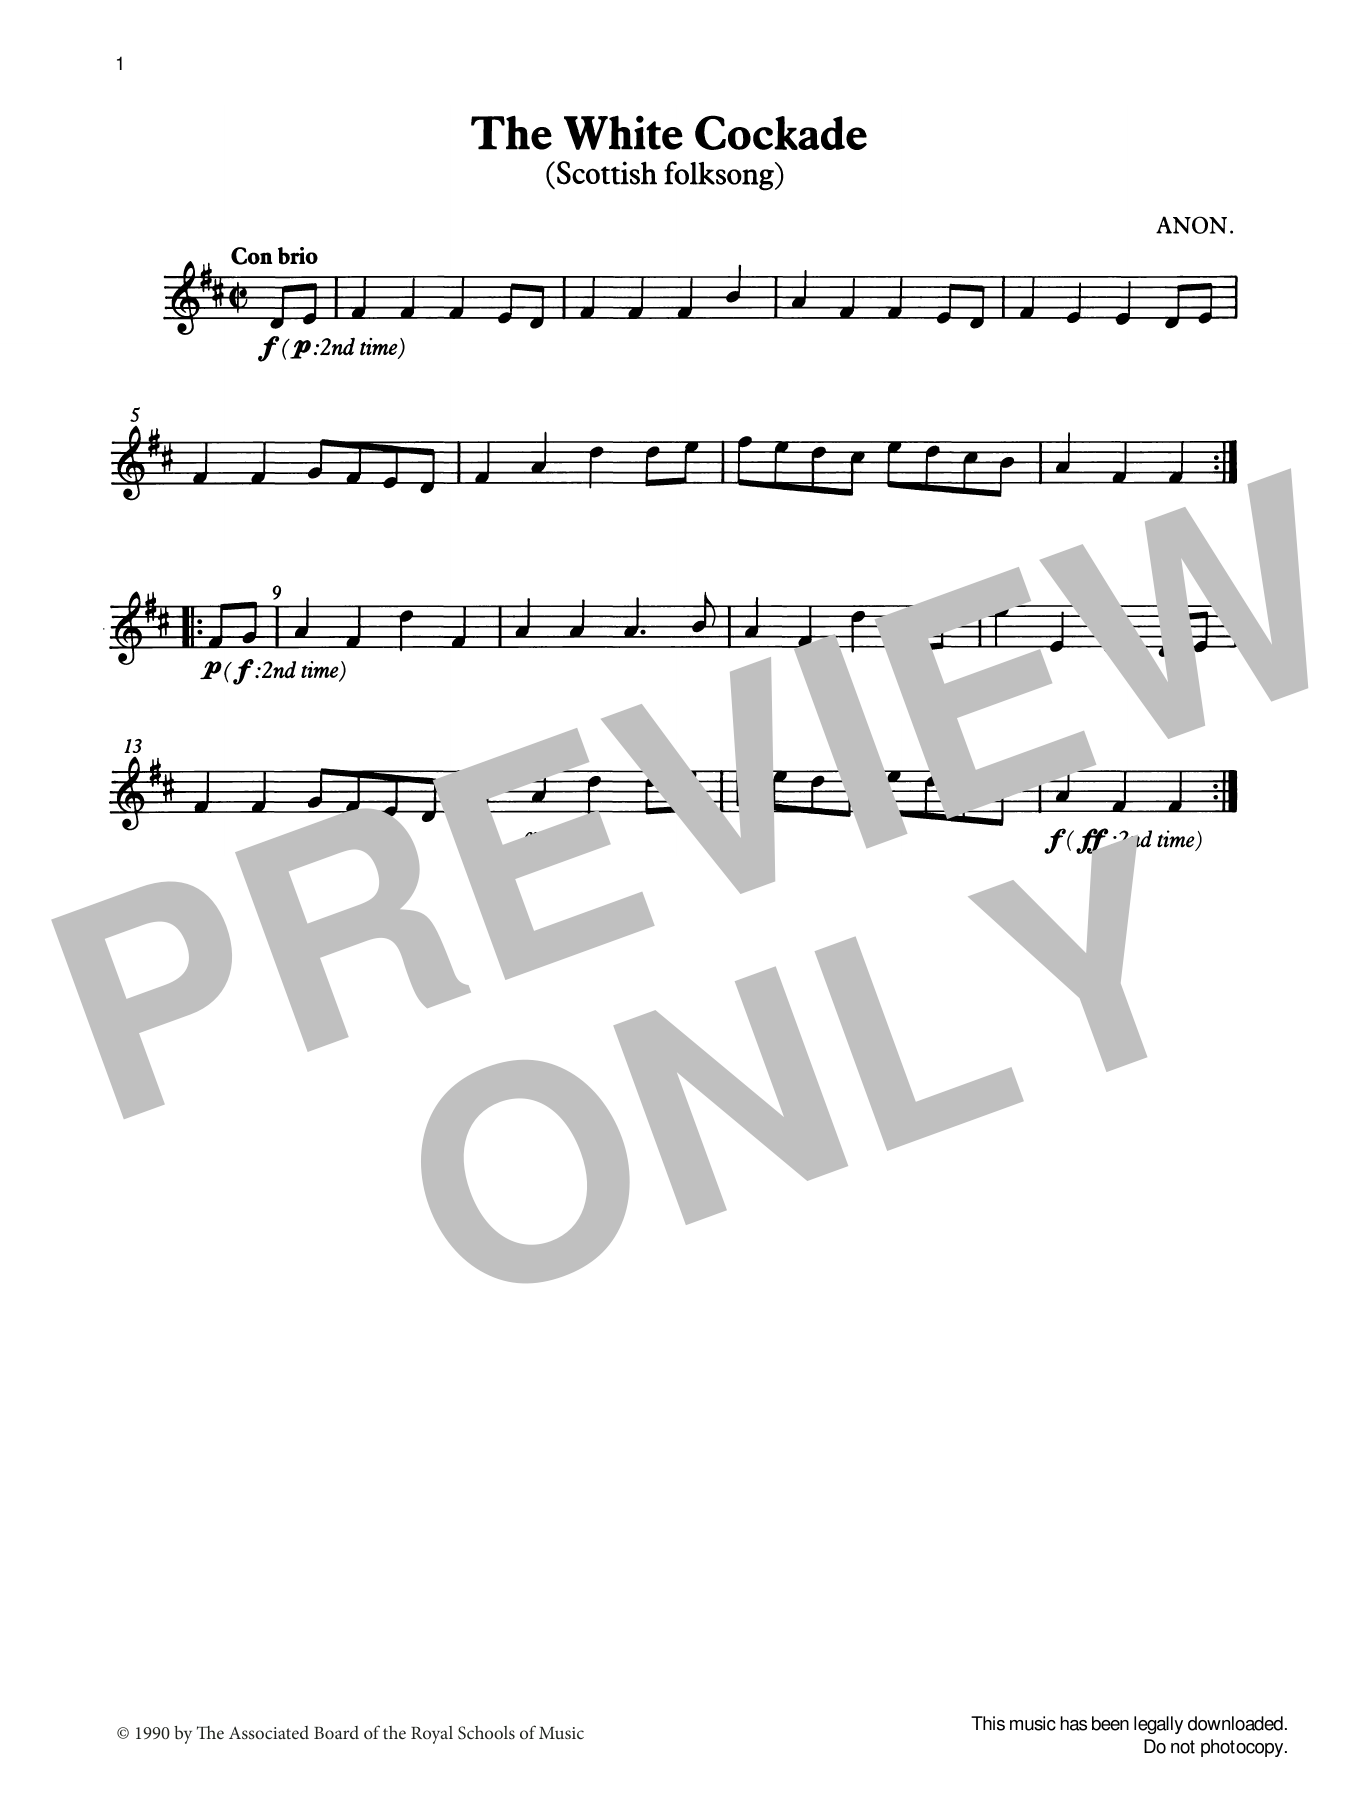 Download Trad. Scottish The White Cockade from Graded Music for Sheet Music